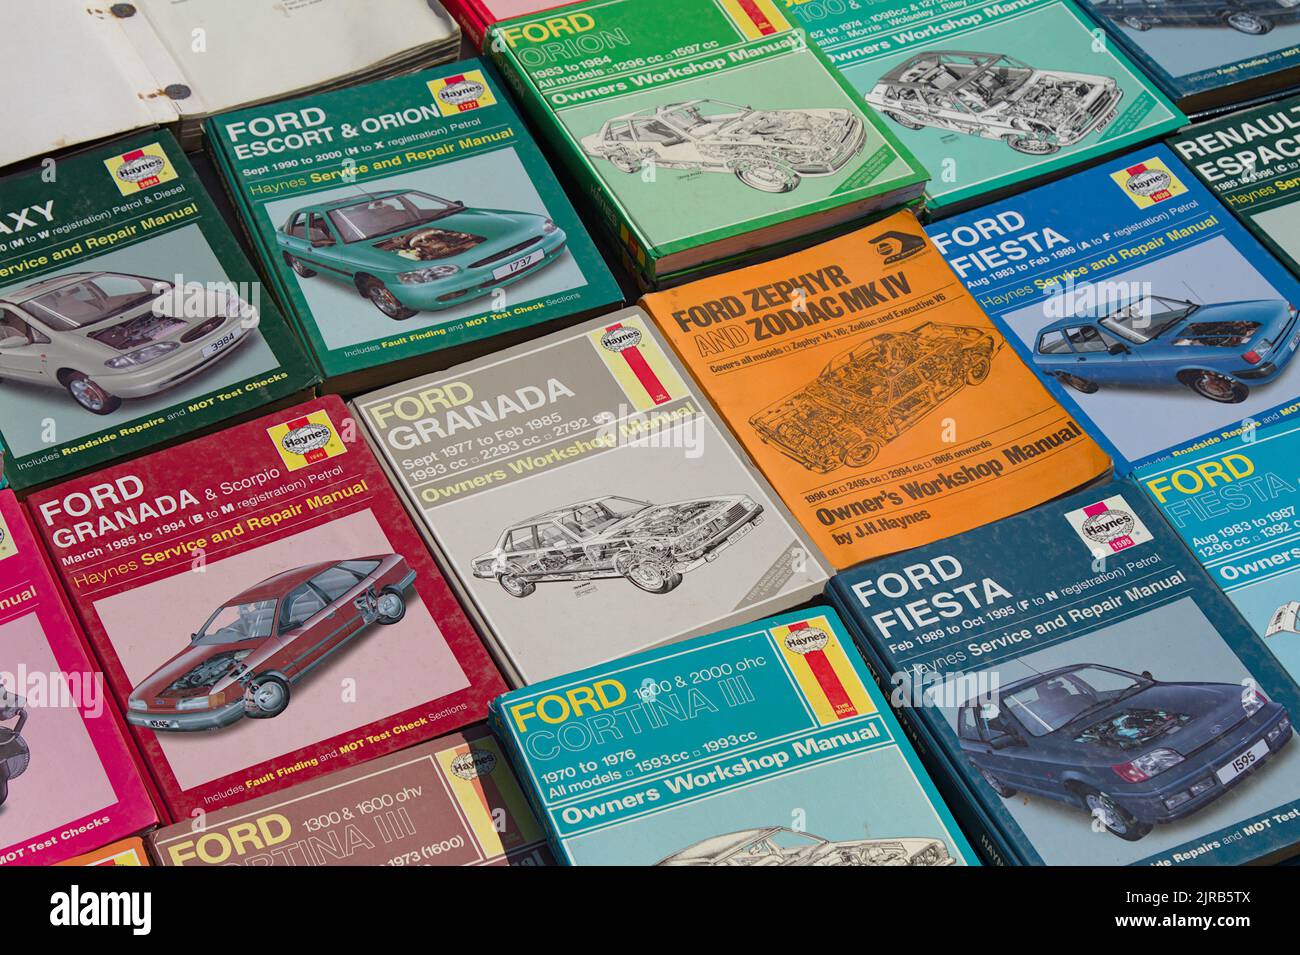 Photograph Of A Collection Of Vehicle Maintenance Handbooks Including Haynes Workshop Manuals, UK Stock Photo